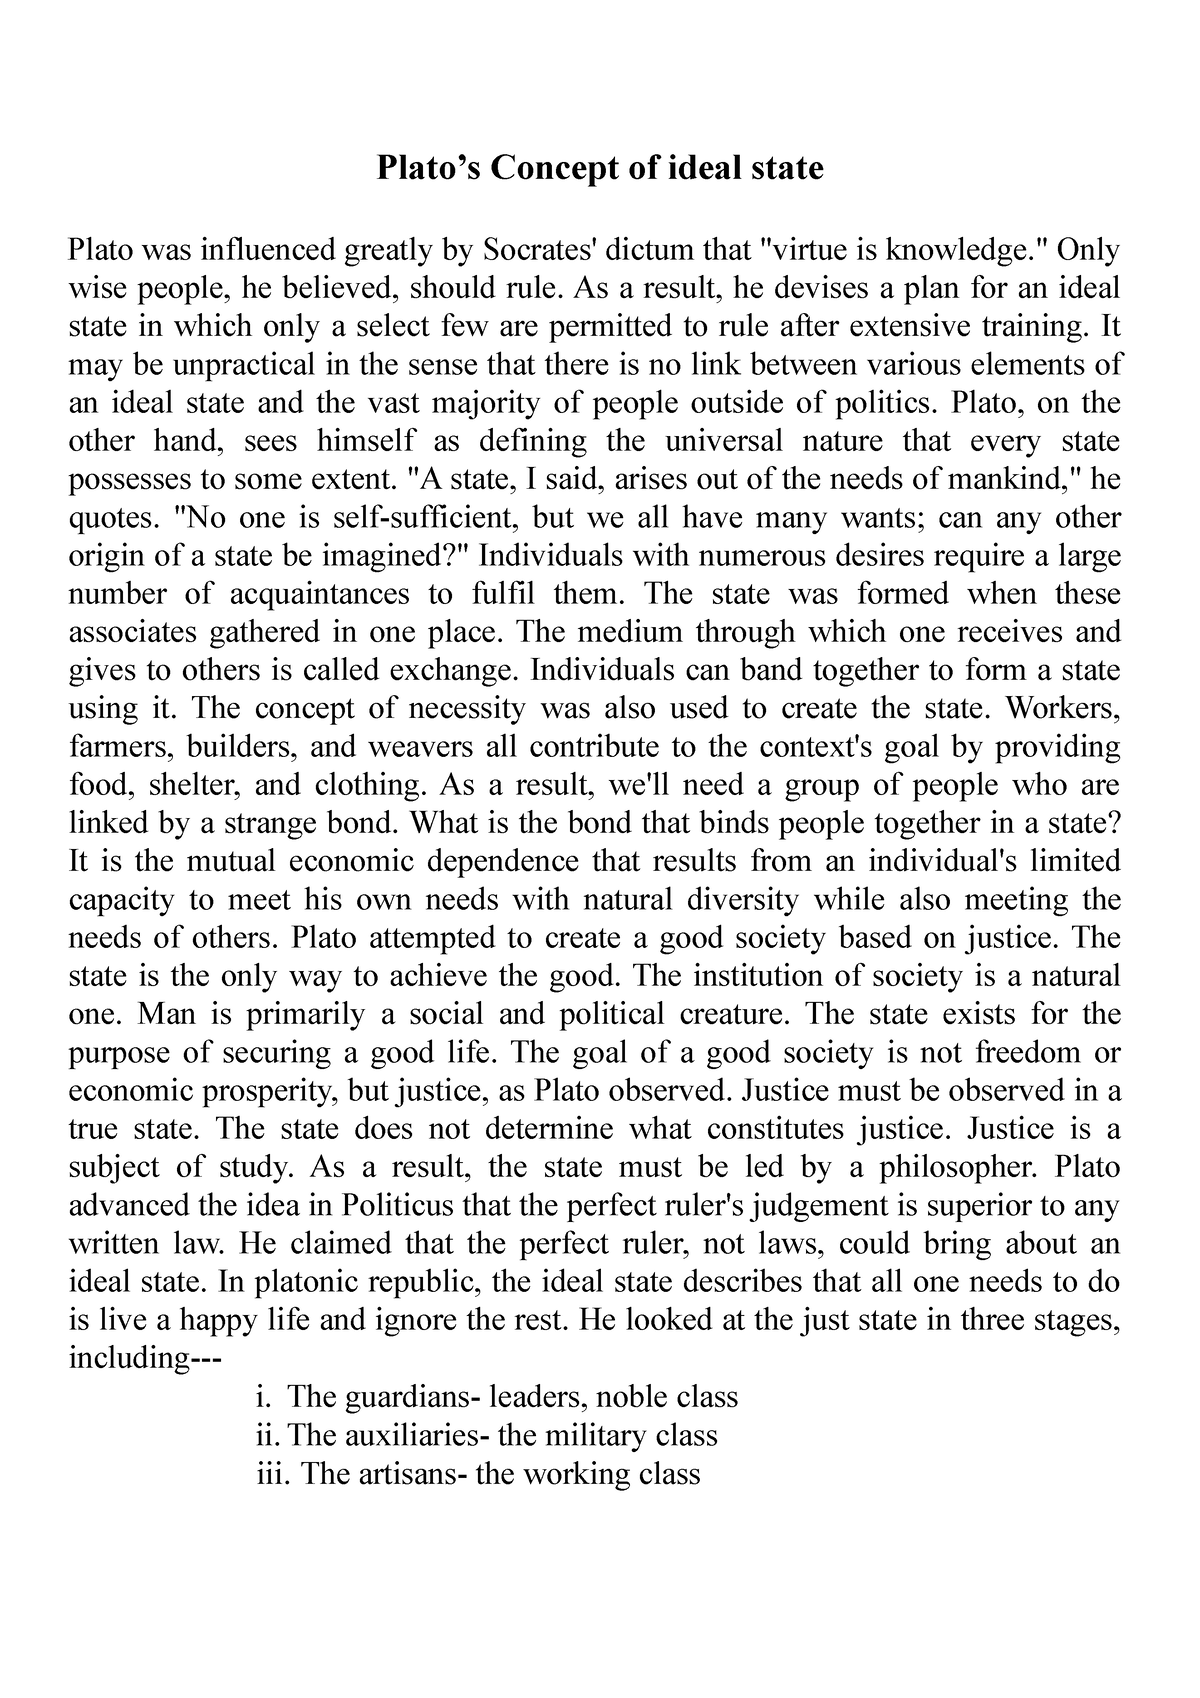 essay on plato's ideal state